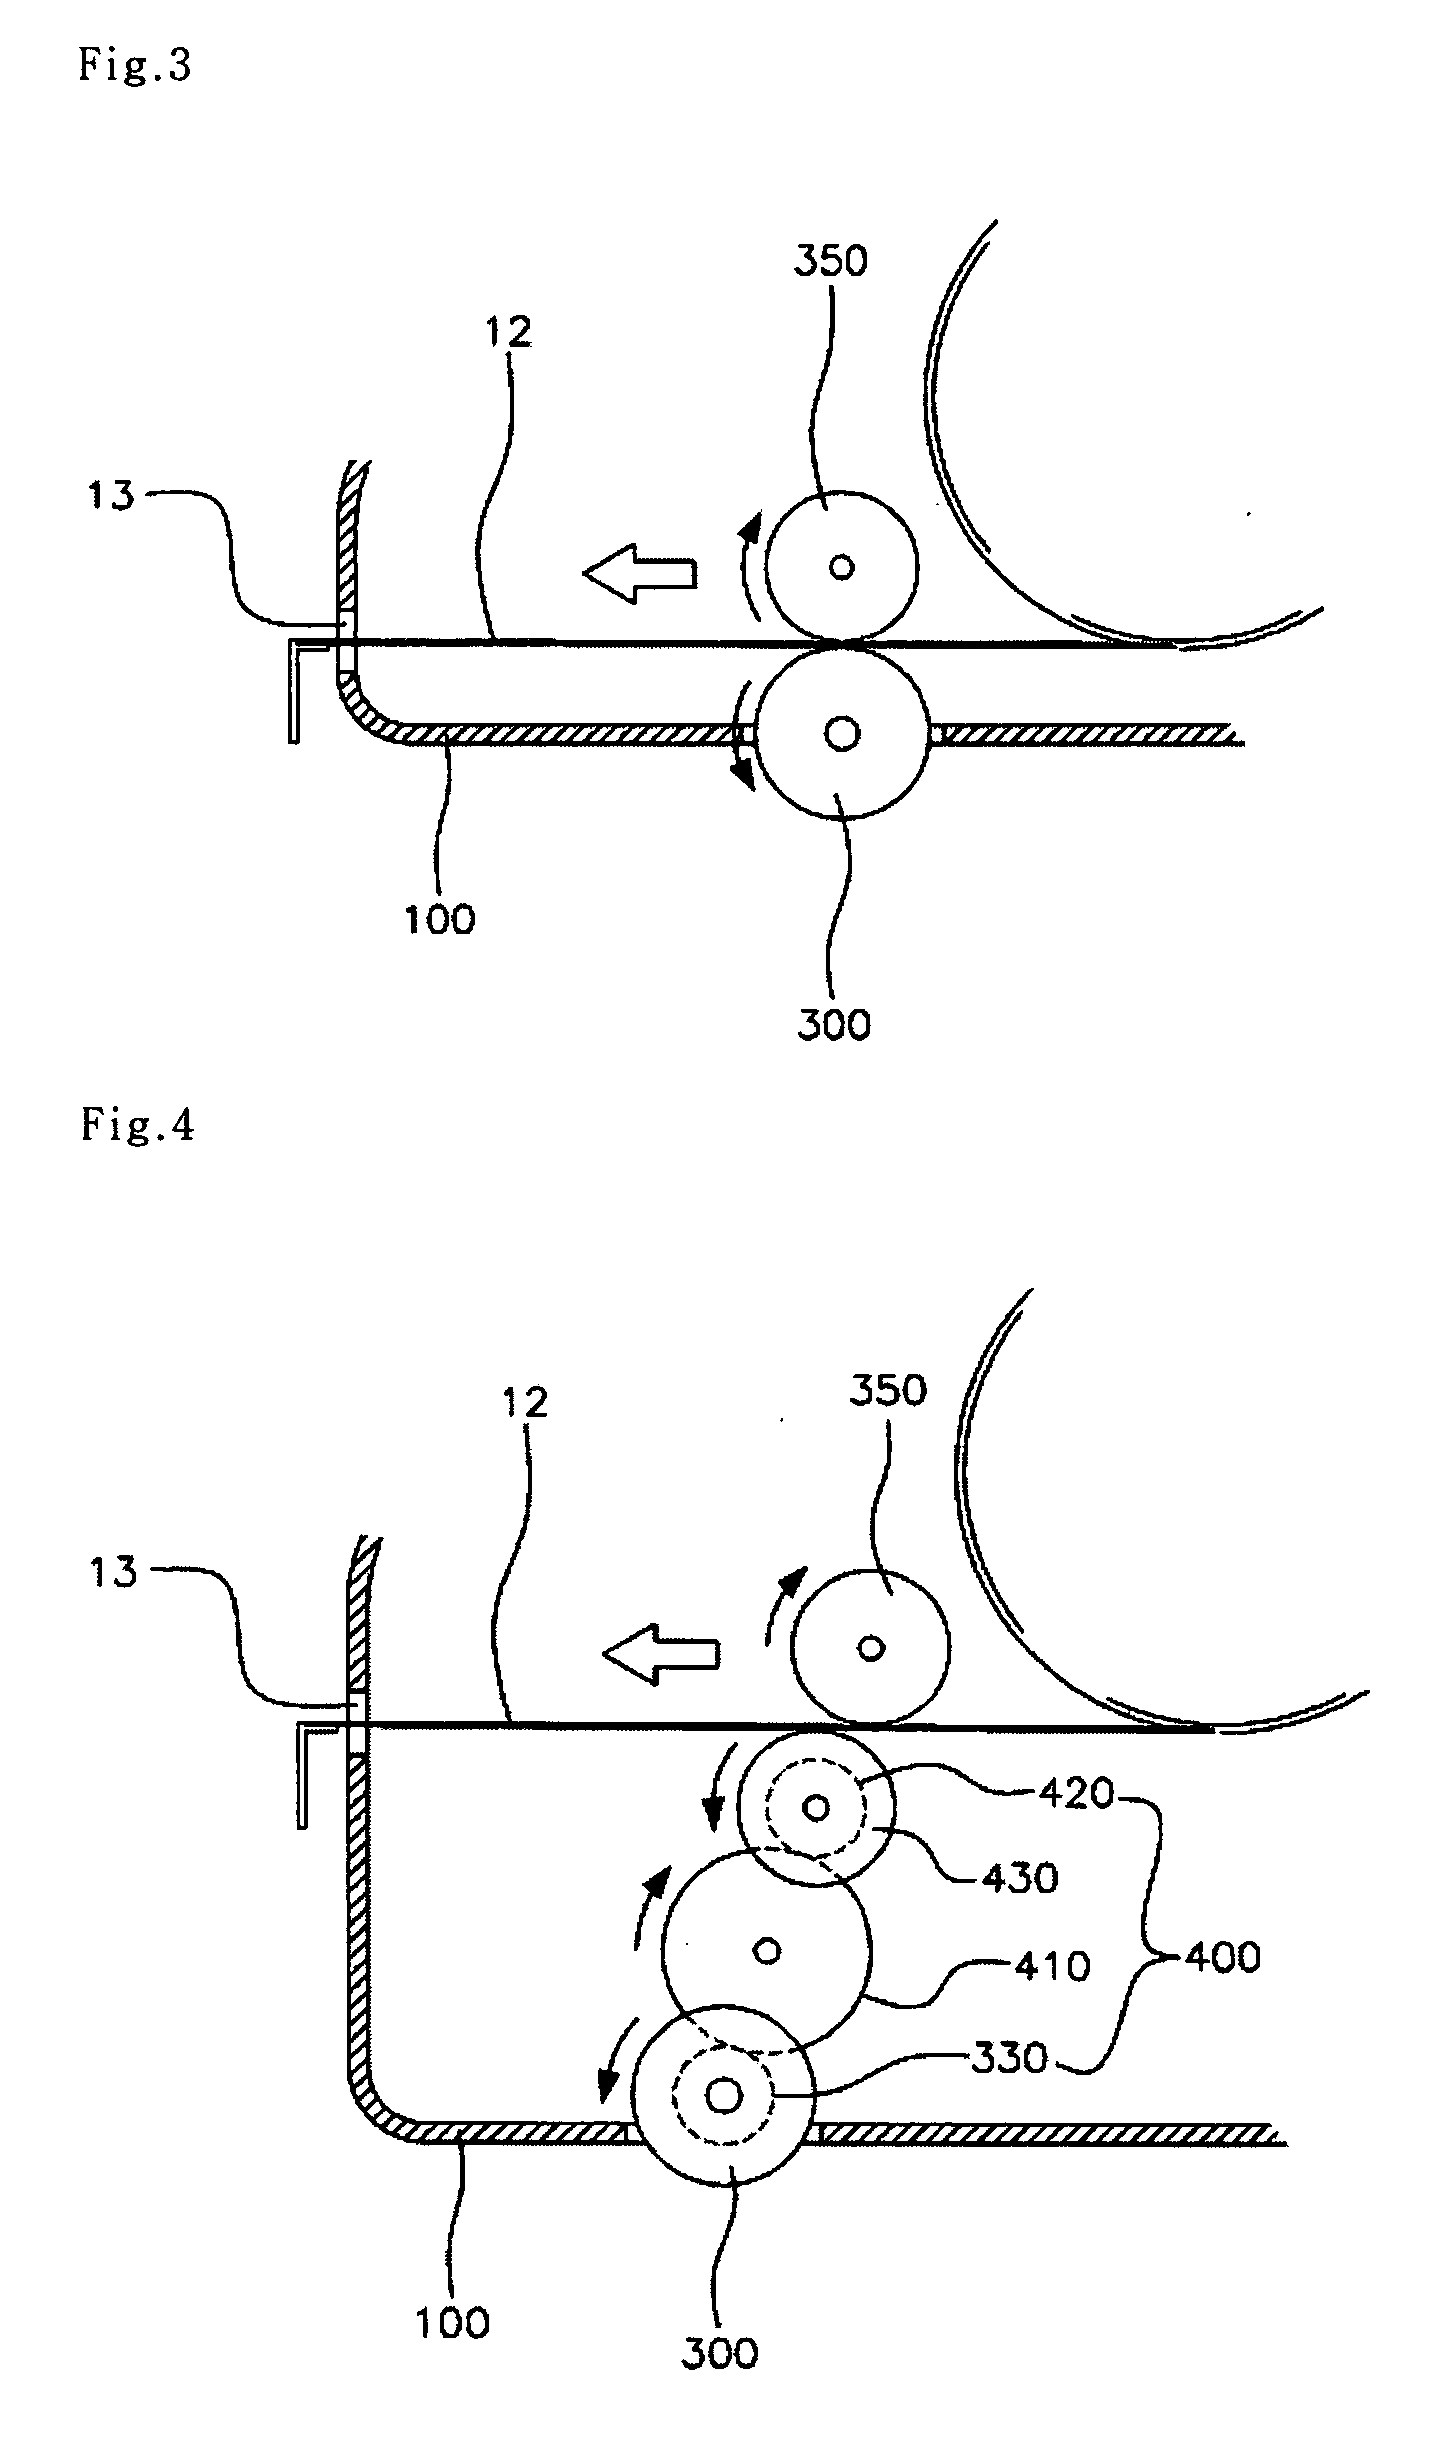 Tape measure with automatic blade extension mechanism